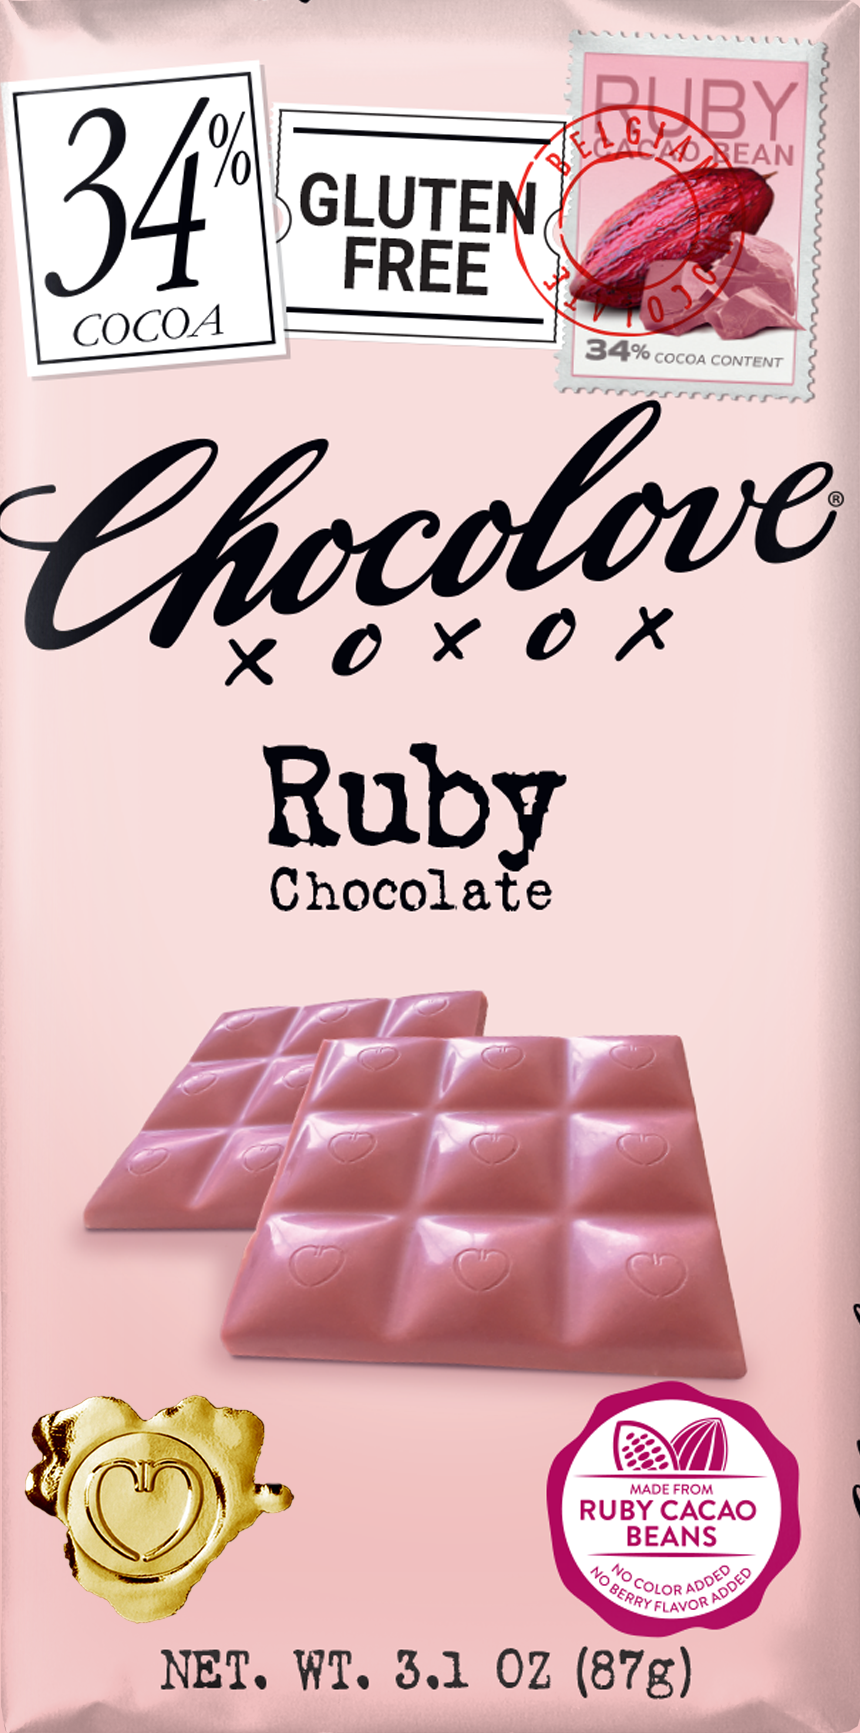 What Is Ruby Chocolate and Why Is It Special?